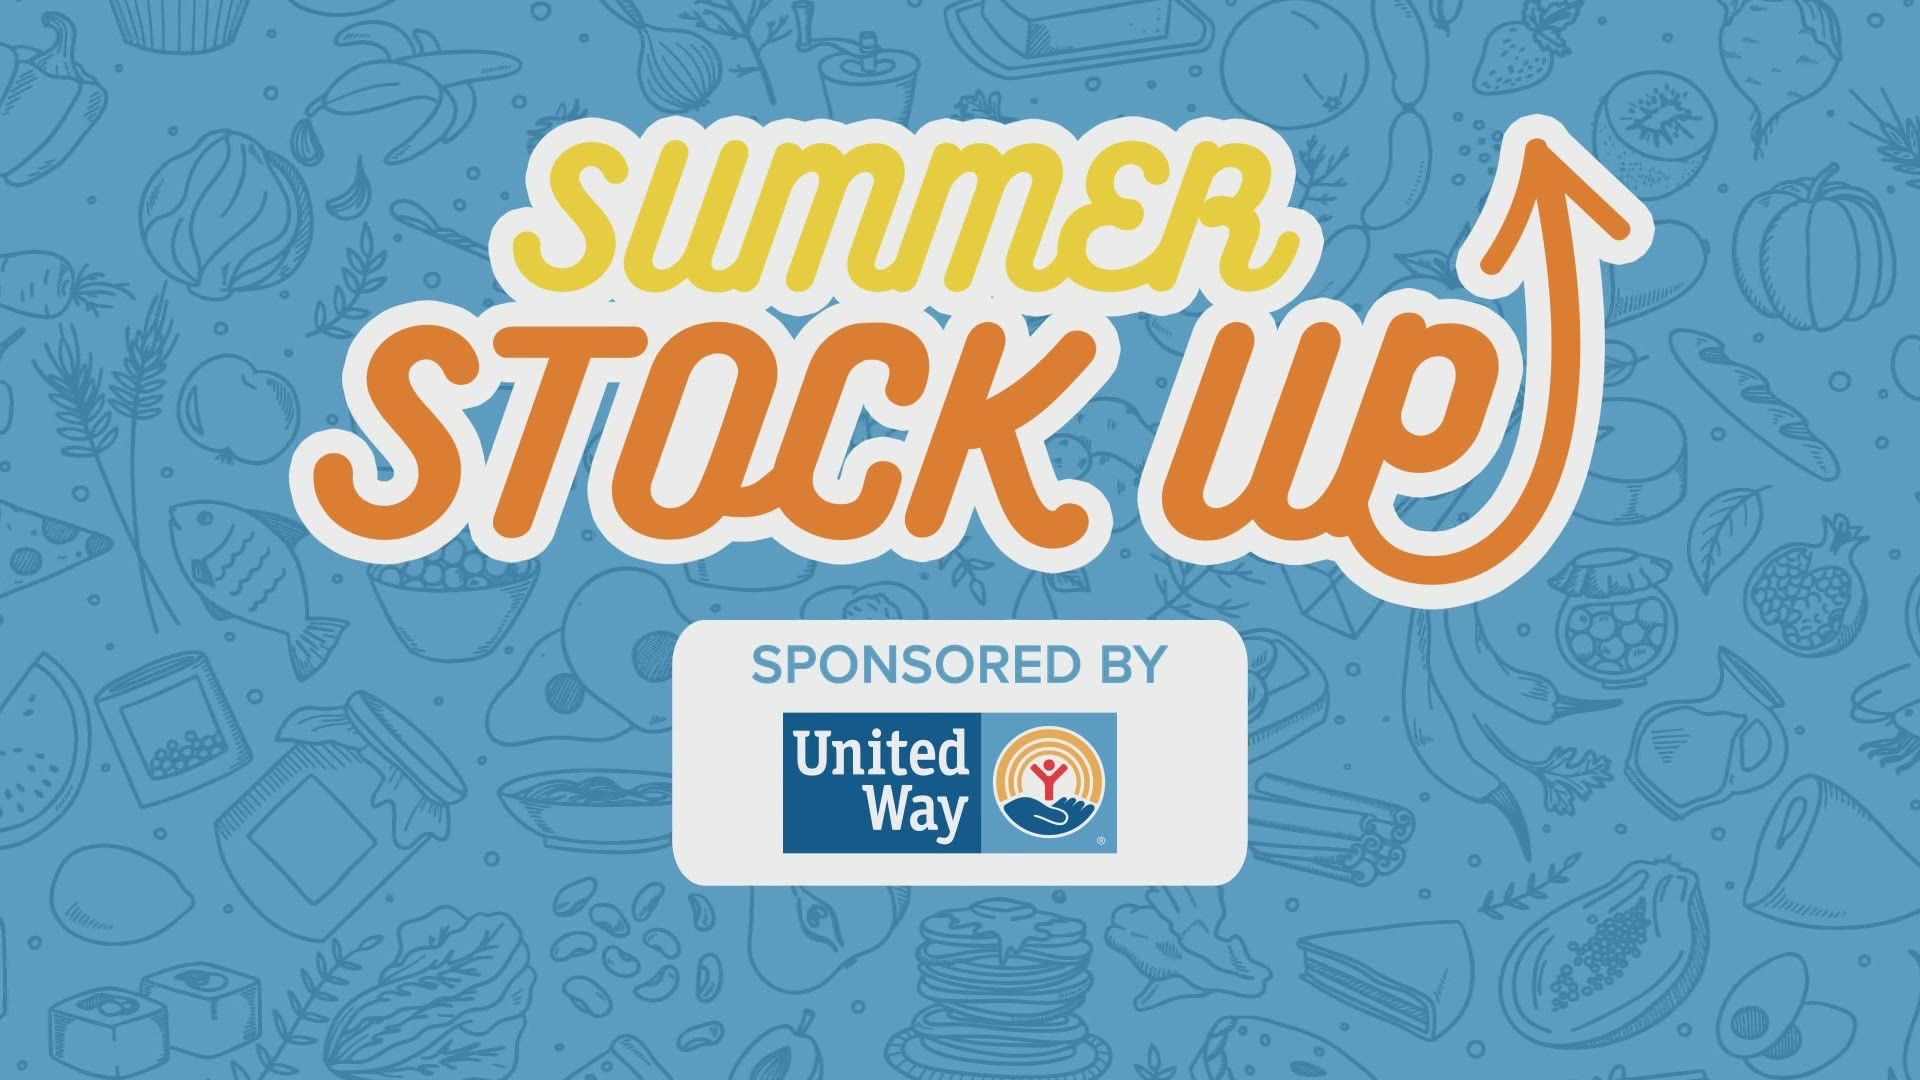 United Way and 13 ON YOUR SIDE are teaming up for the Summer Stock-Up.